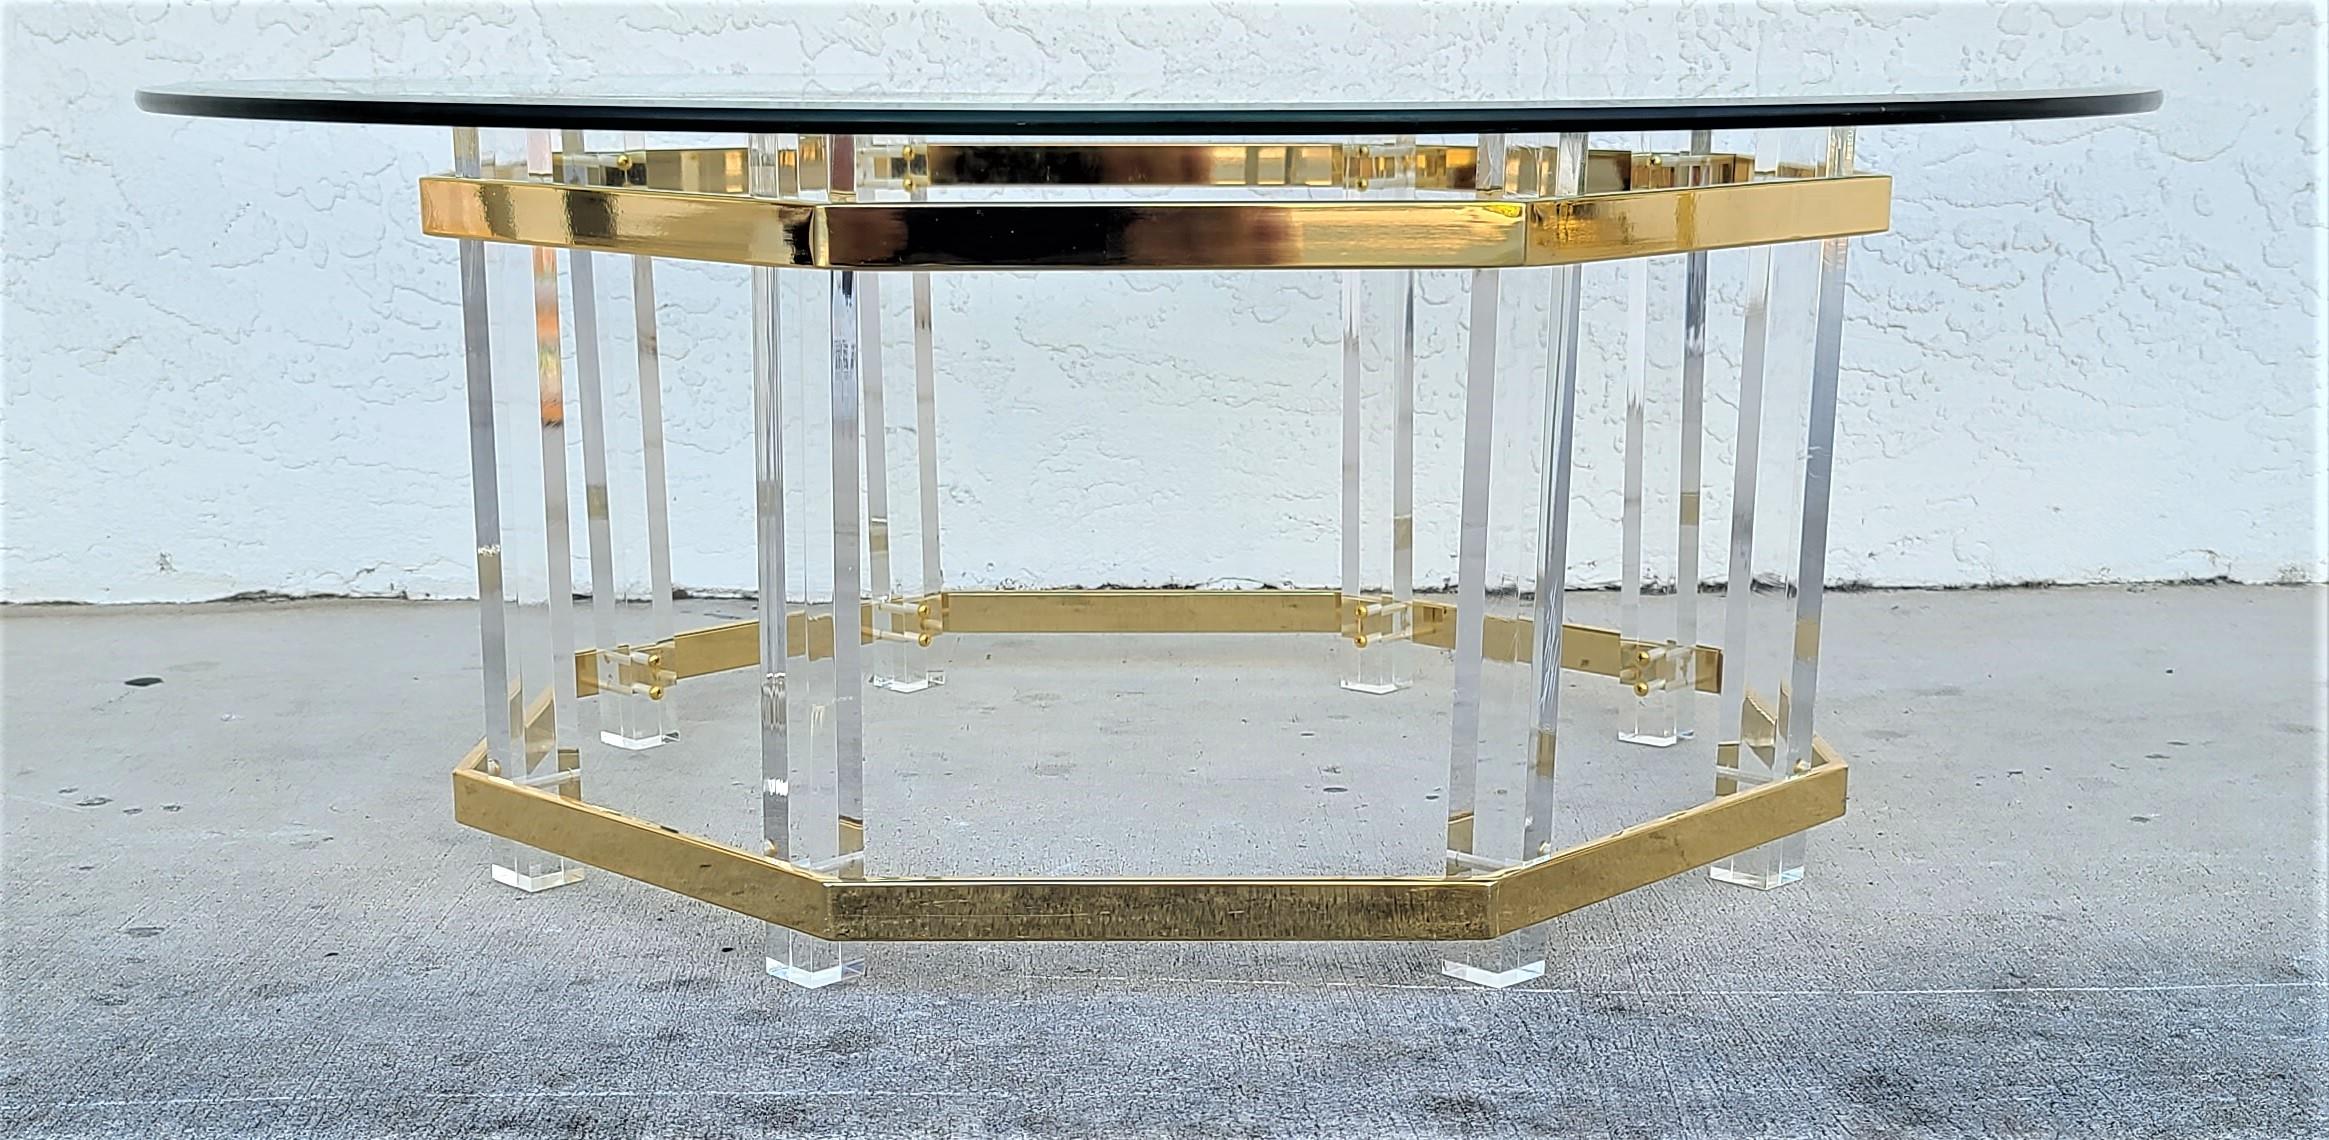 Offering One Of Our Recent Palm Beach Estate Fine Furniture Acquisitions Of A
Charles Hollis Jones Mid Century Brass Lucite & Glass Octagonal Coffee Table
With 42